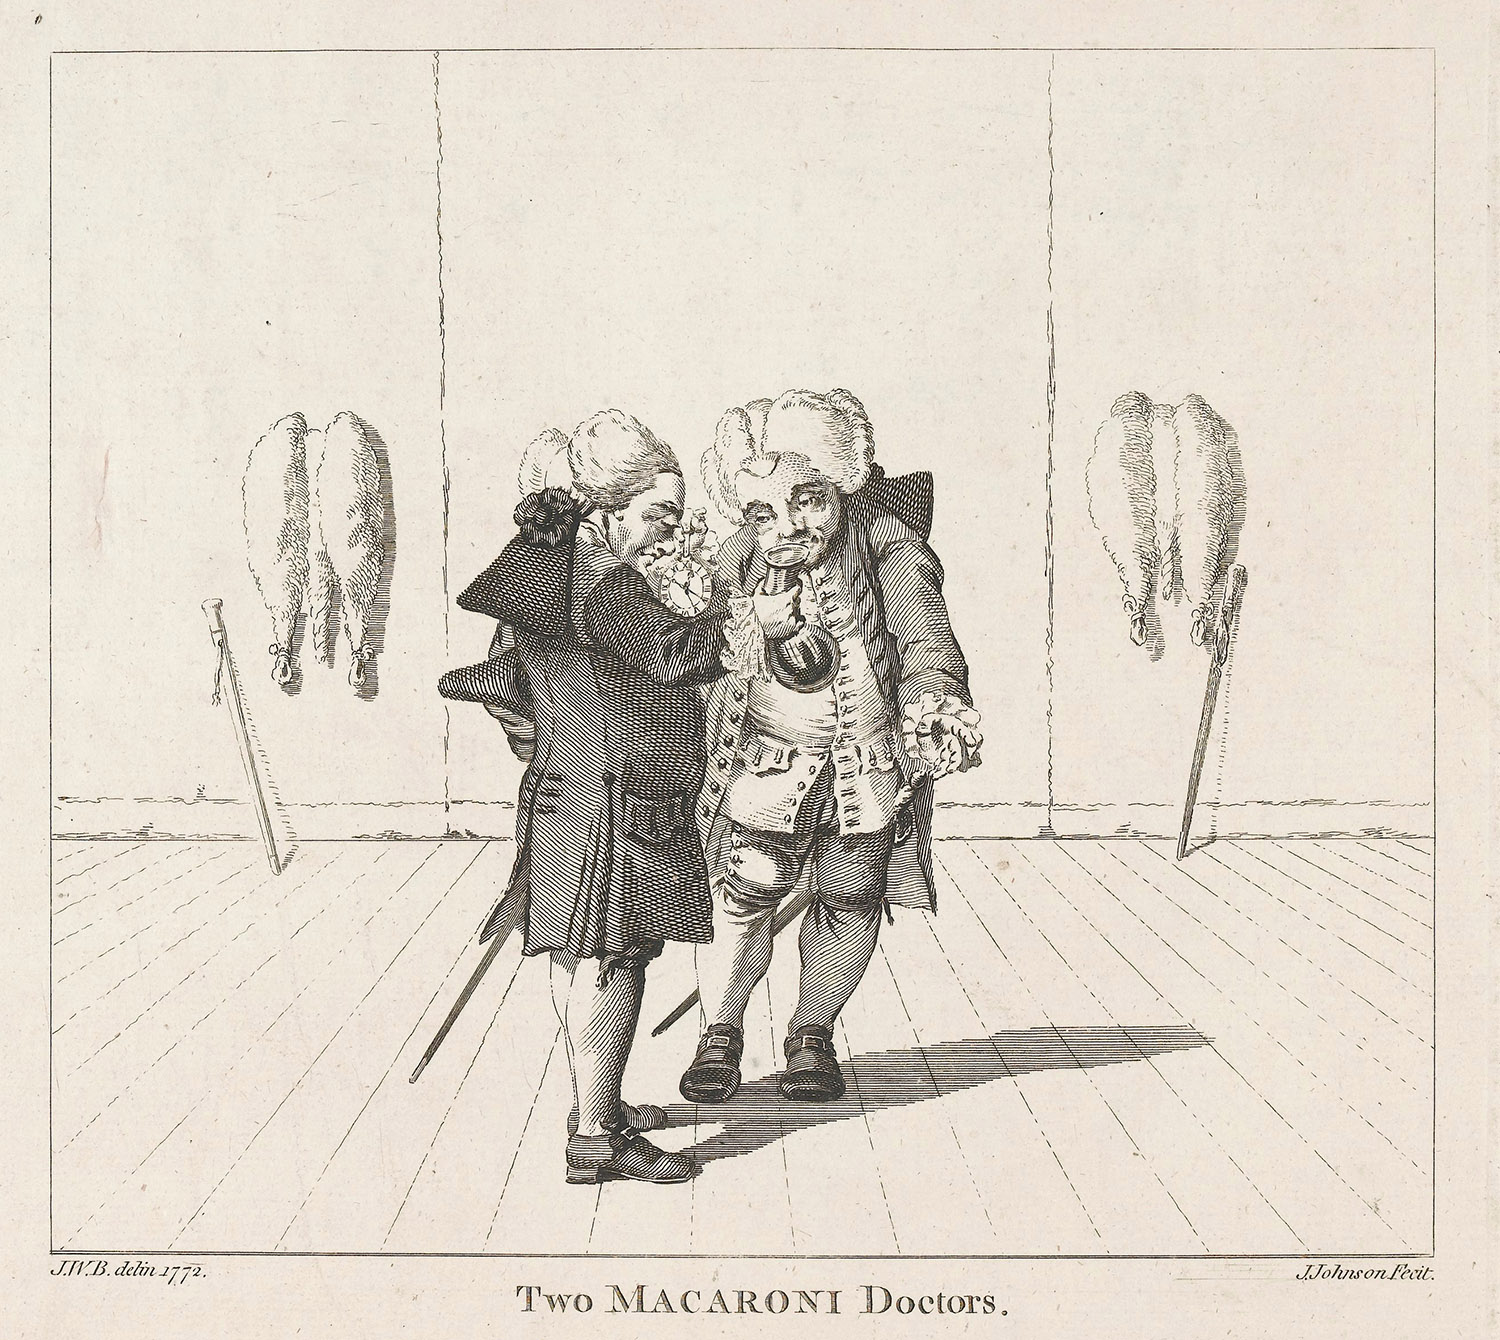 Two physicians in "macaroni" fashions. Etching by J. Johnson after J.W.B., 1772.